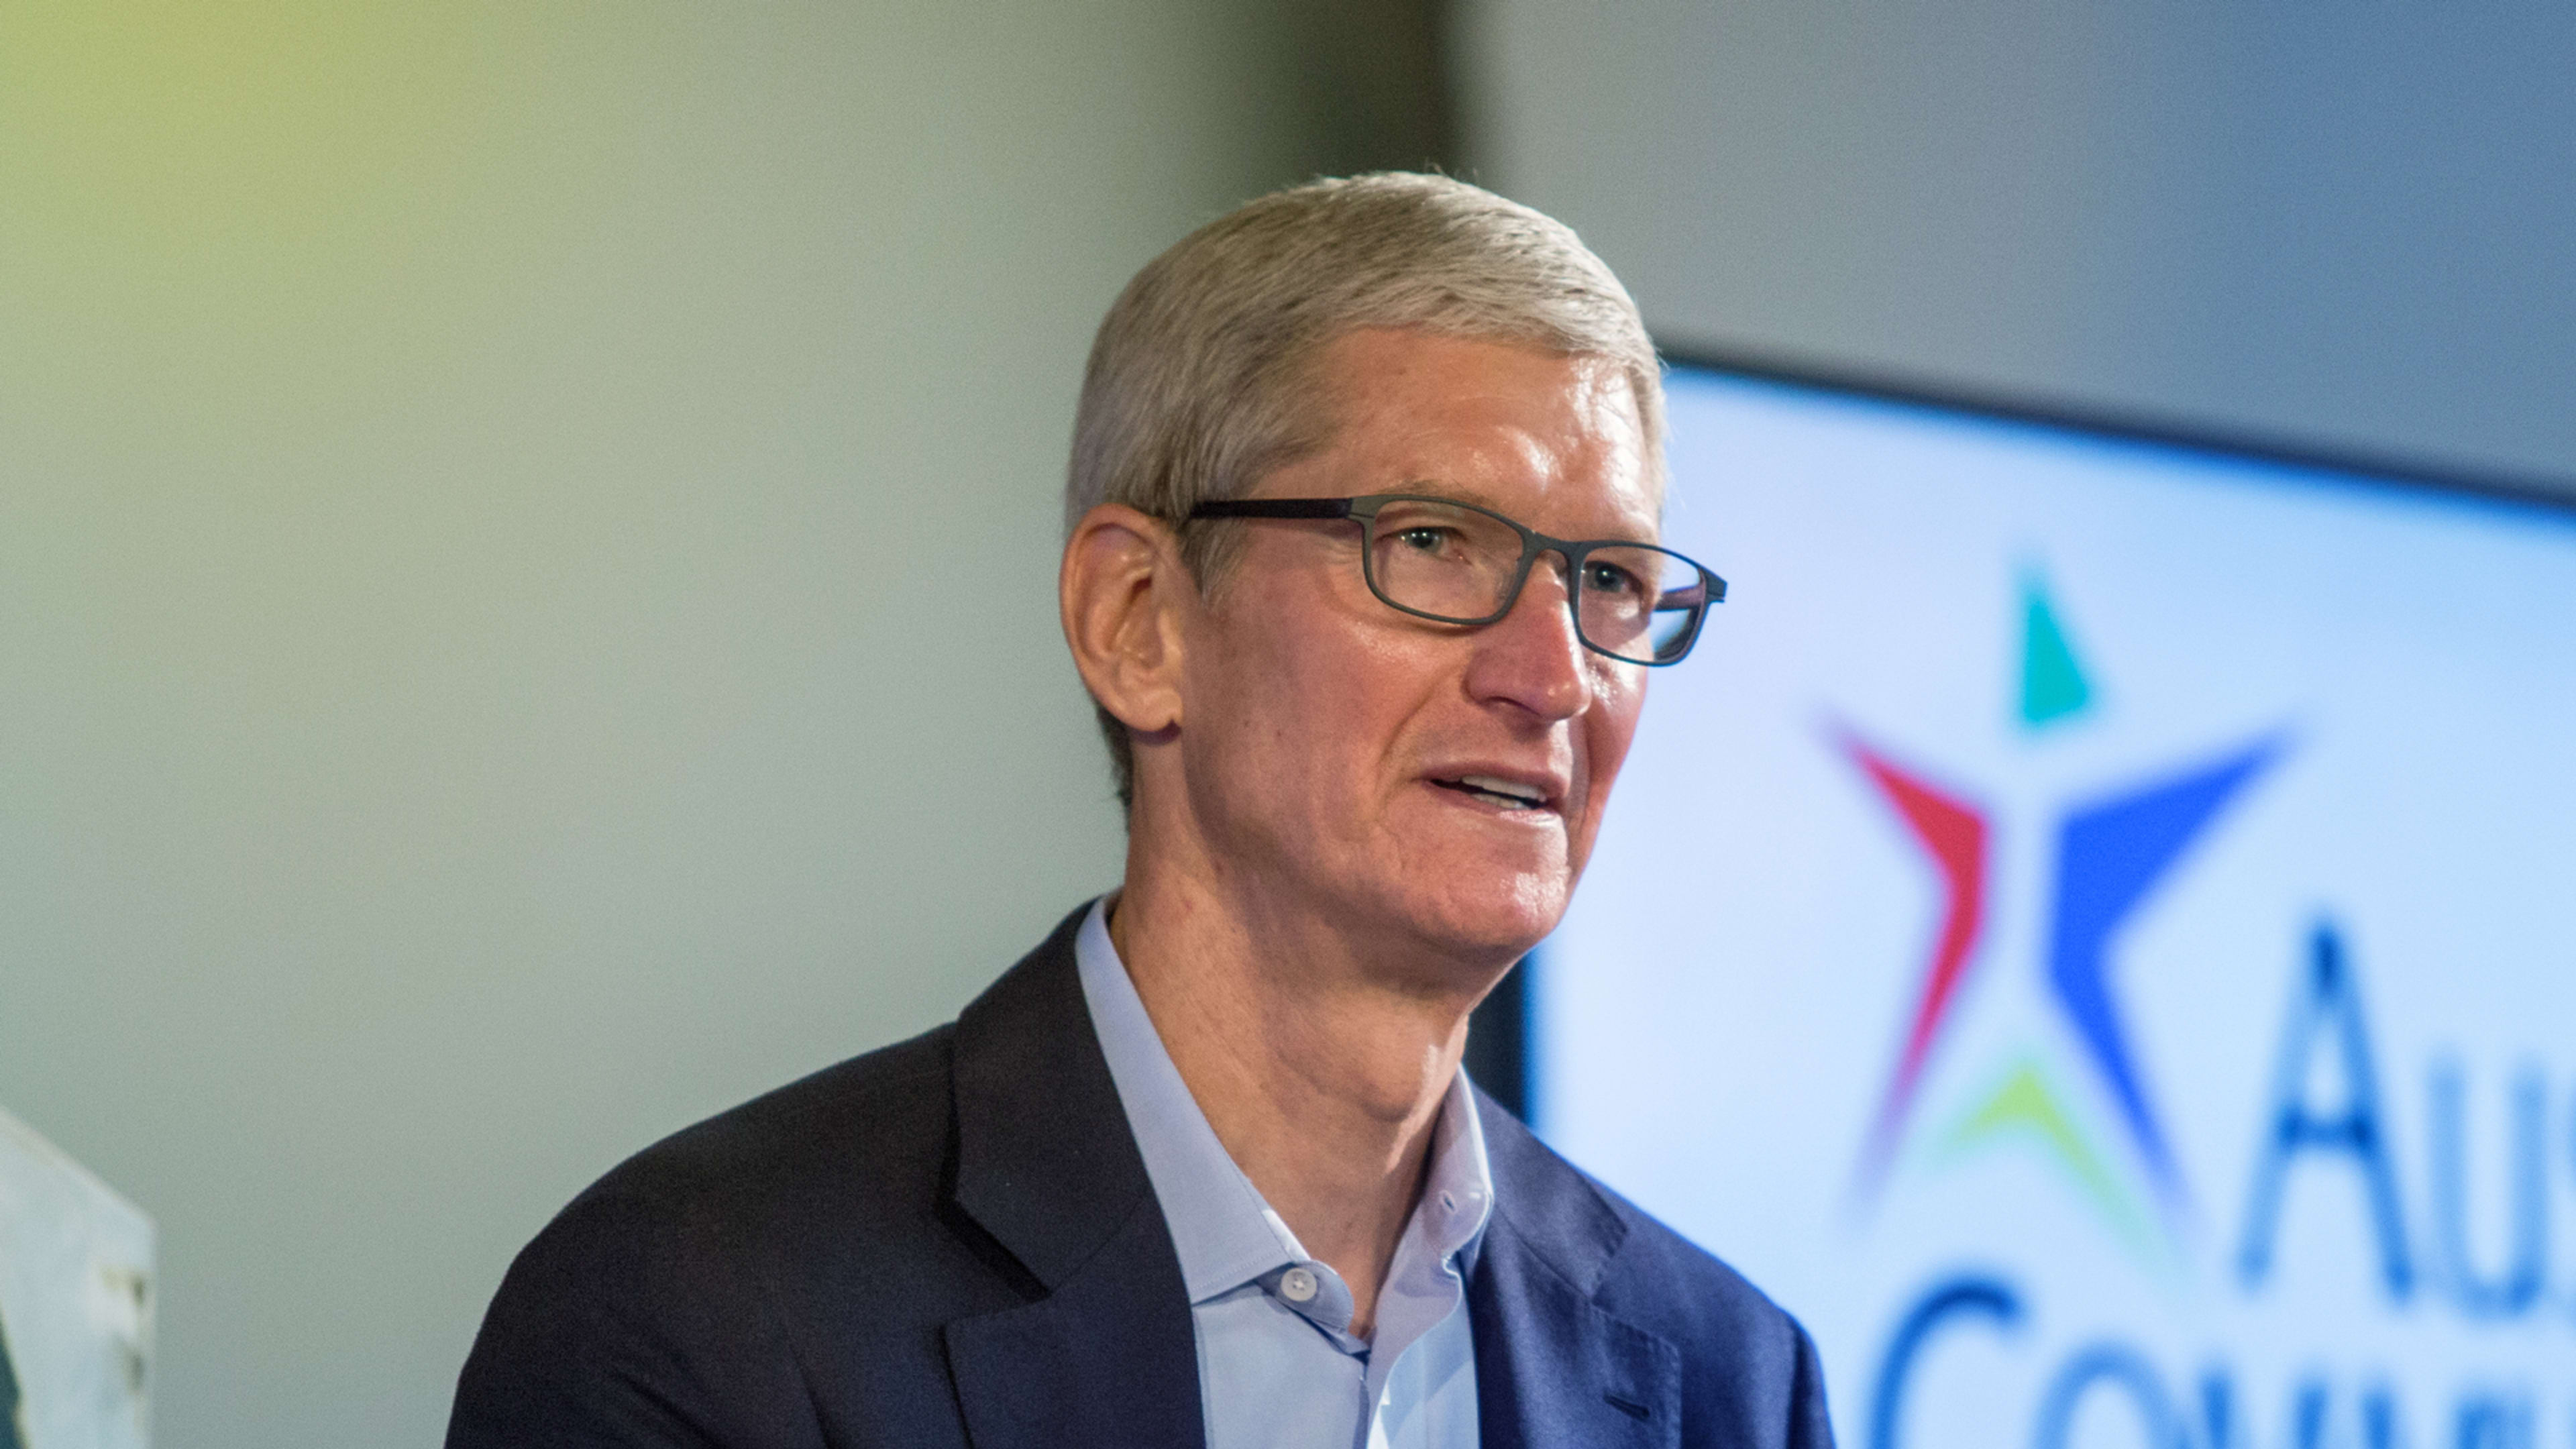 Apple CEO: more data oversight needed in wake of Facebook scandal